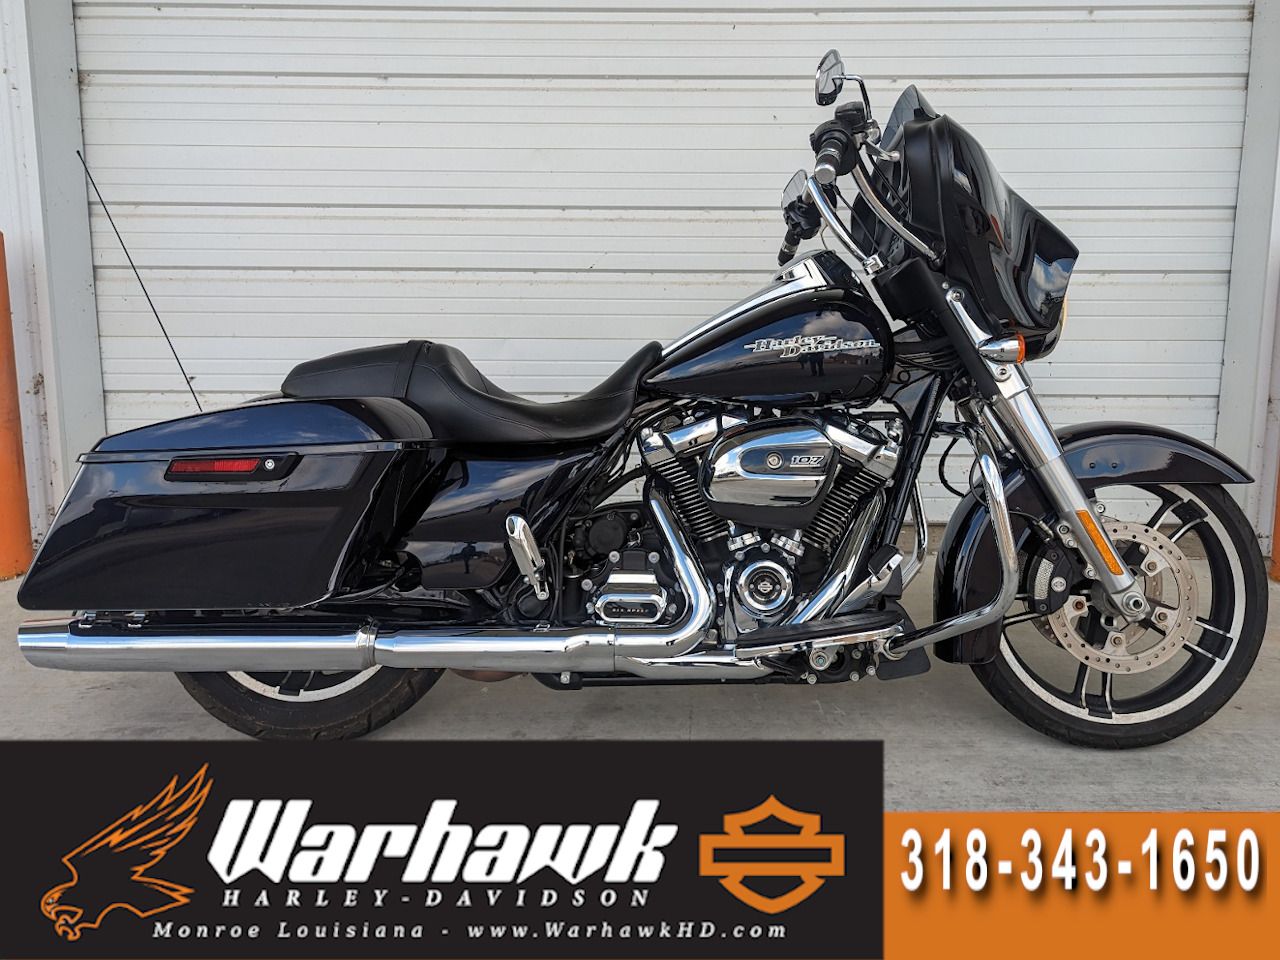 2019 harley davidson street glide for sale close to me - Photo 1